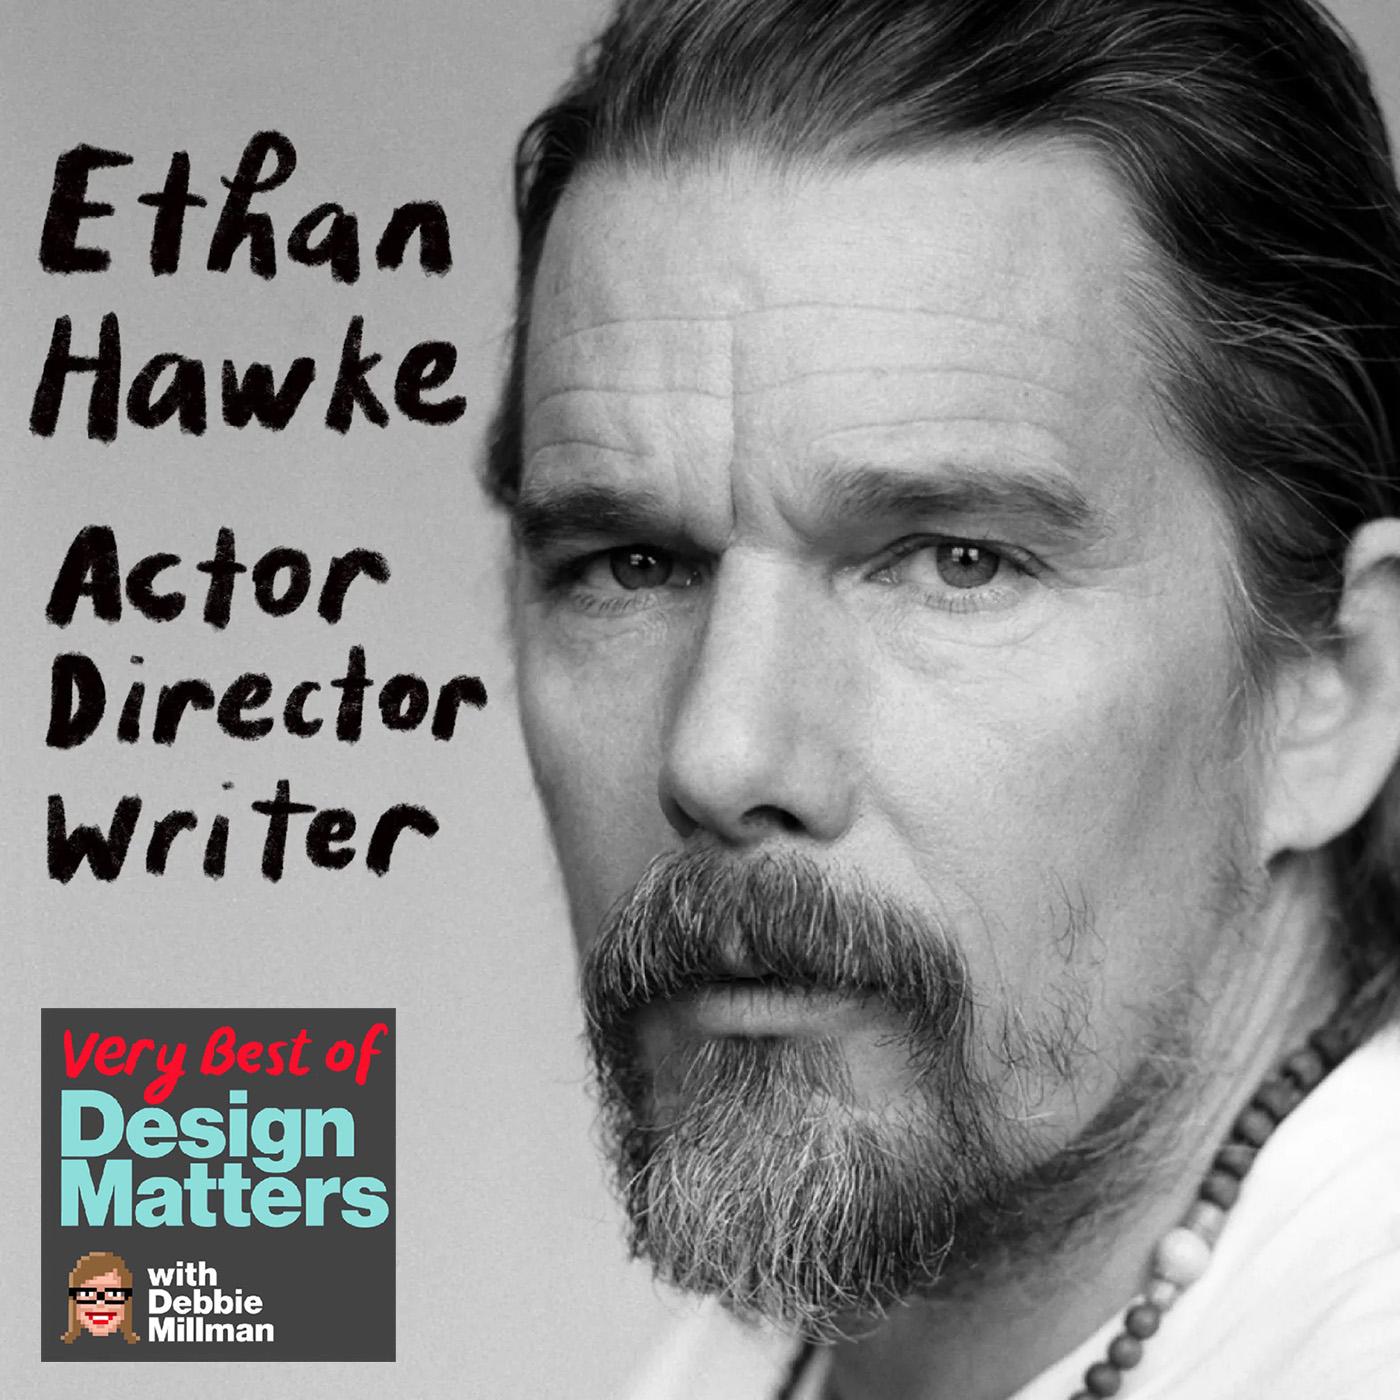 Thumbnail for "Best of Design Matters: Ethan Hawke".